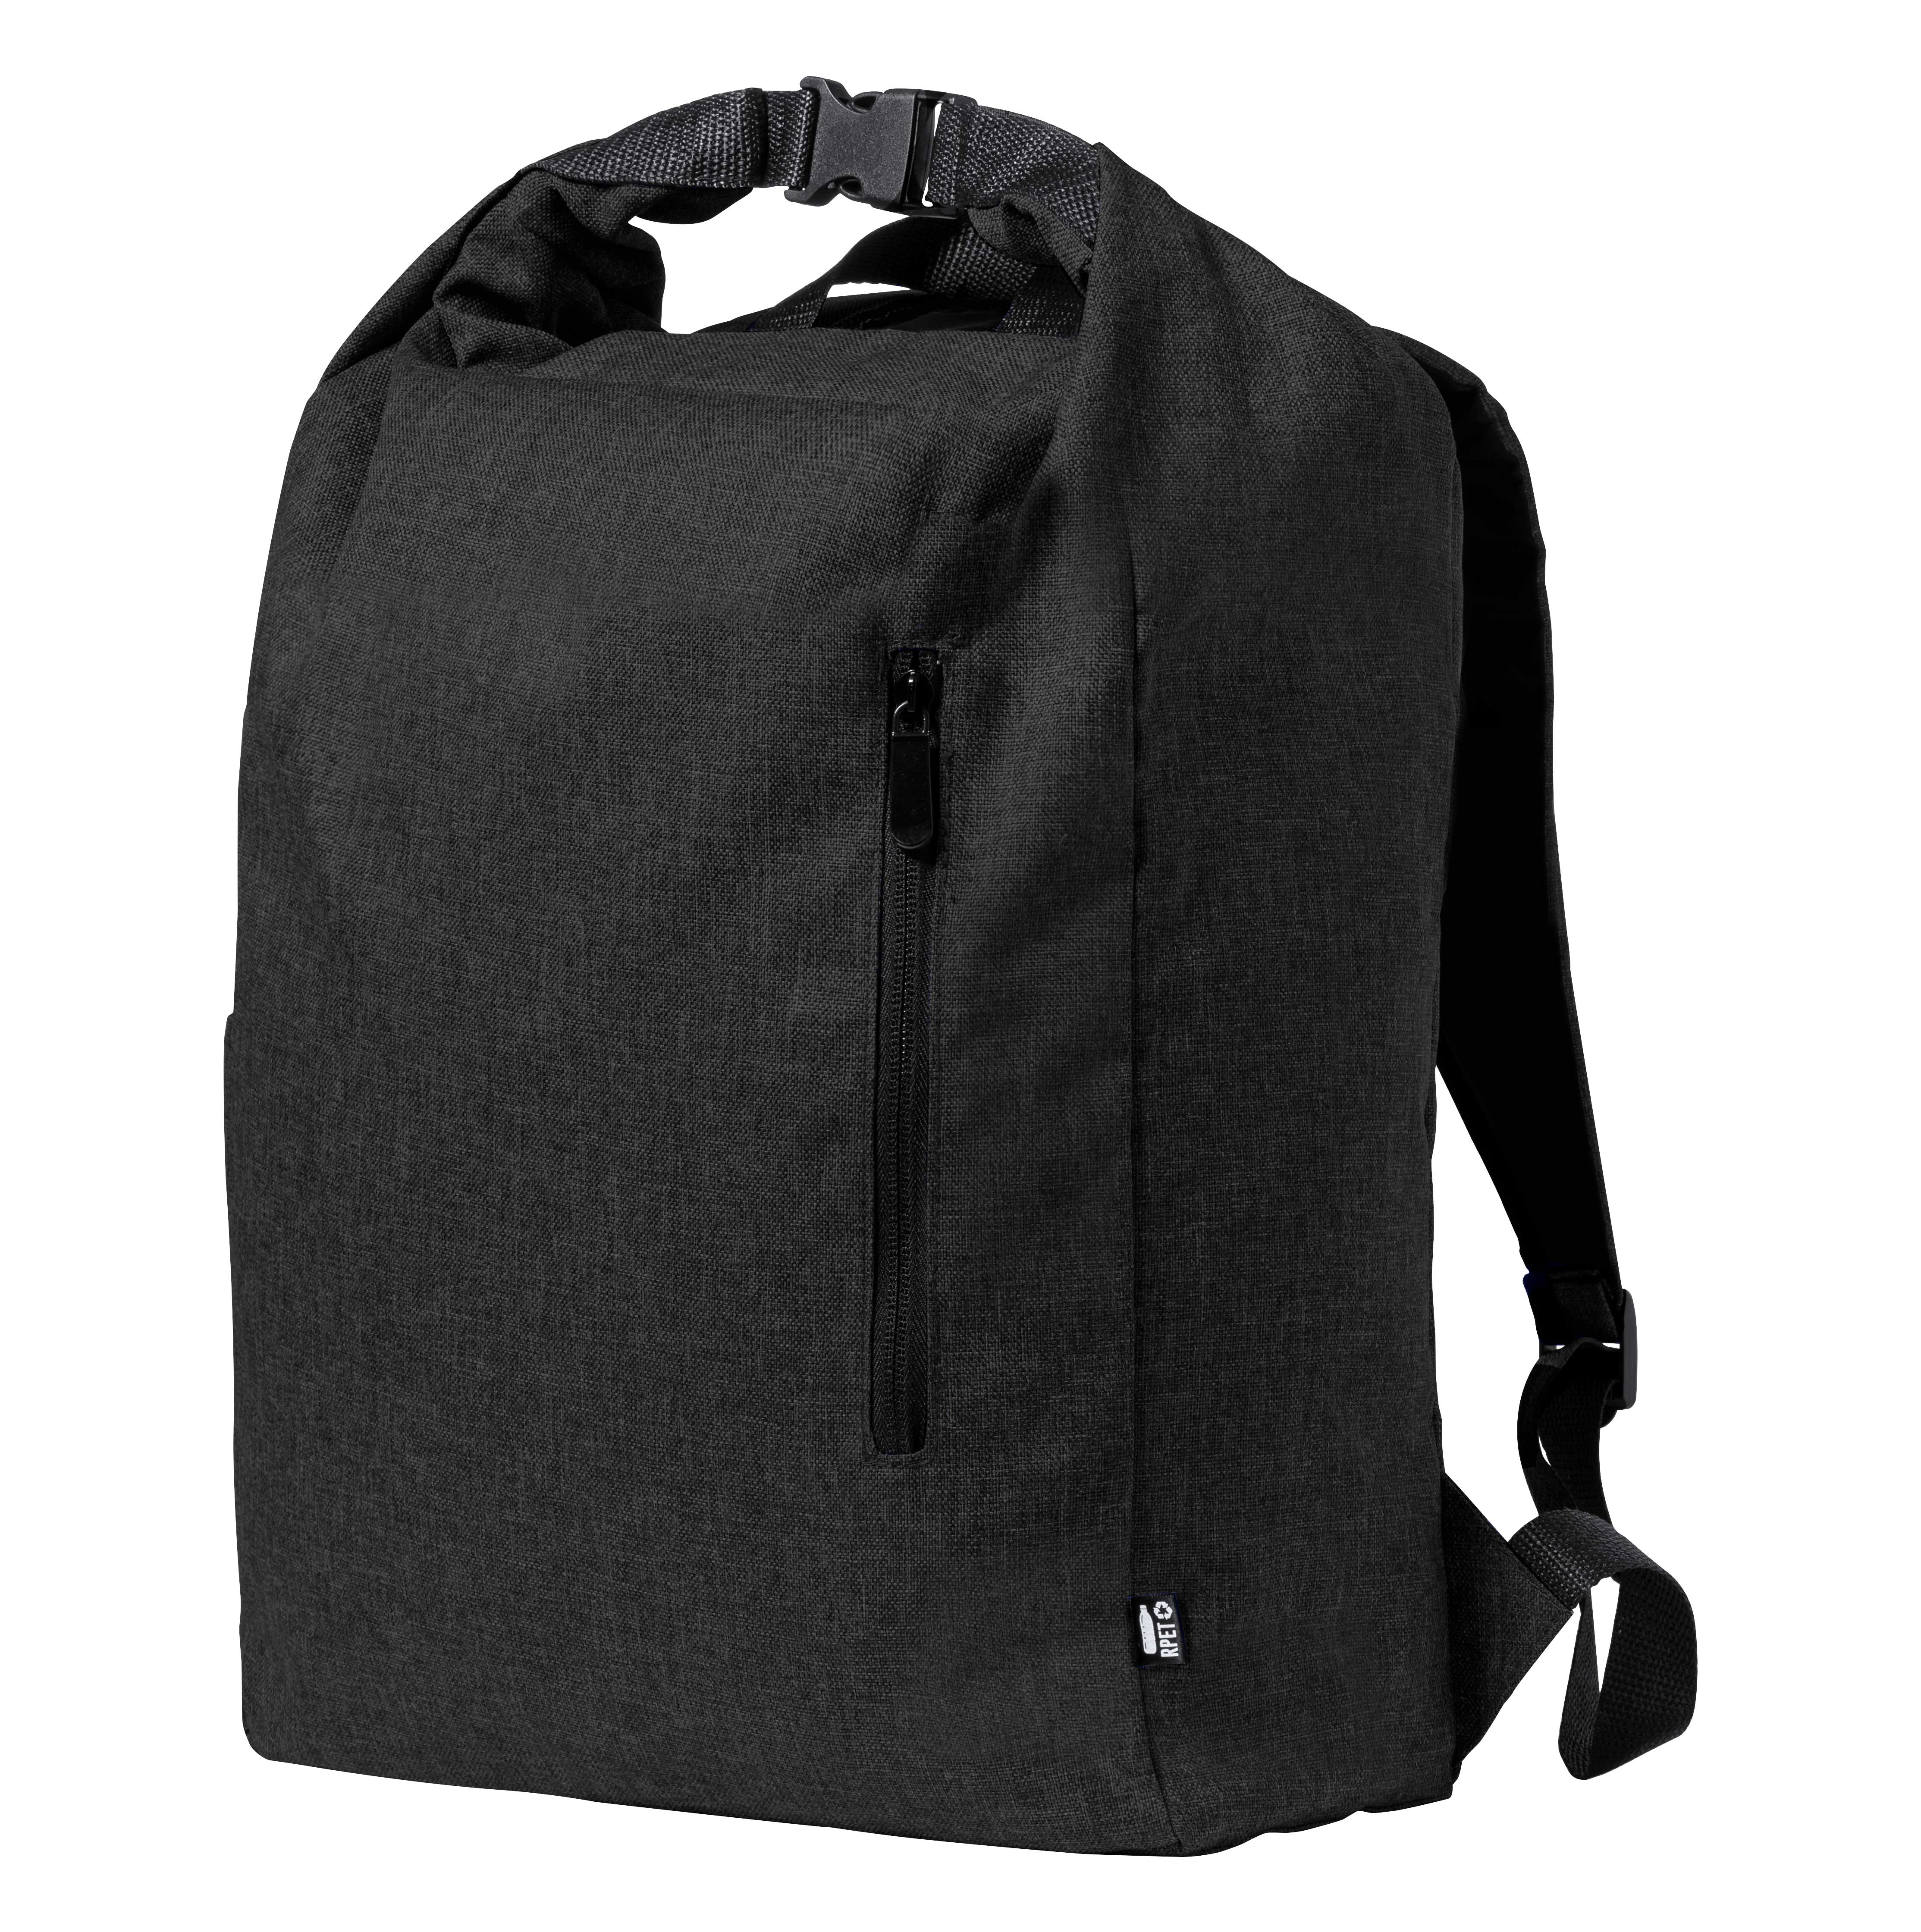 Polyester backpack SHERPAK recycled material